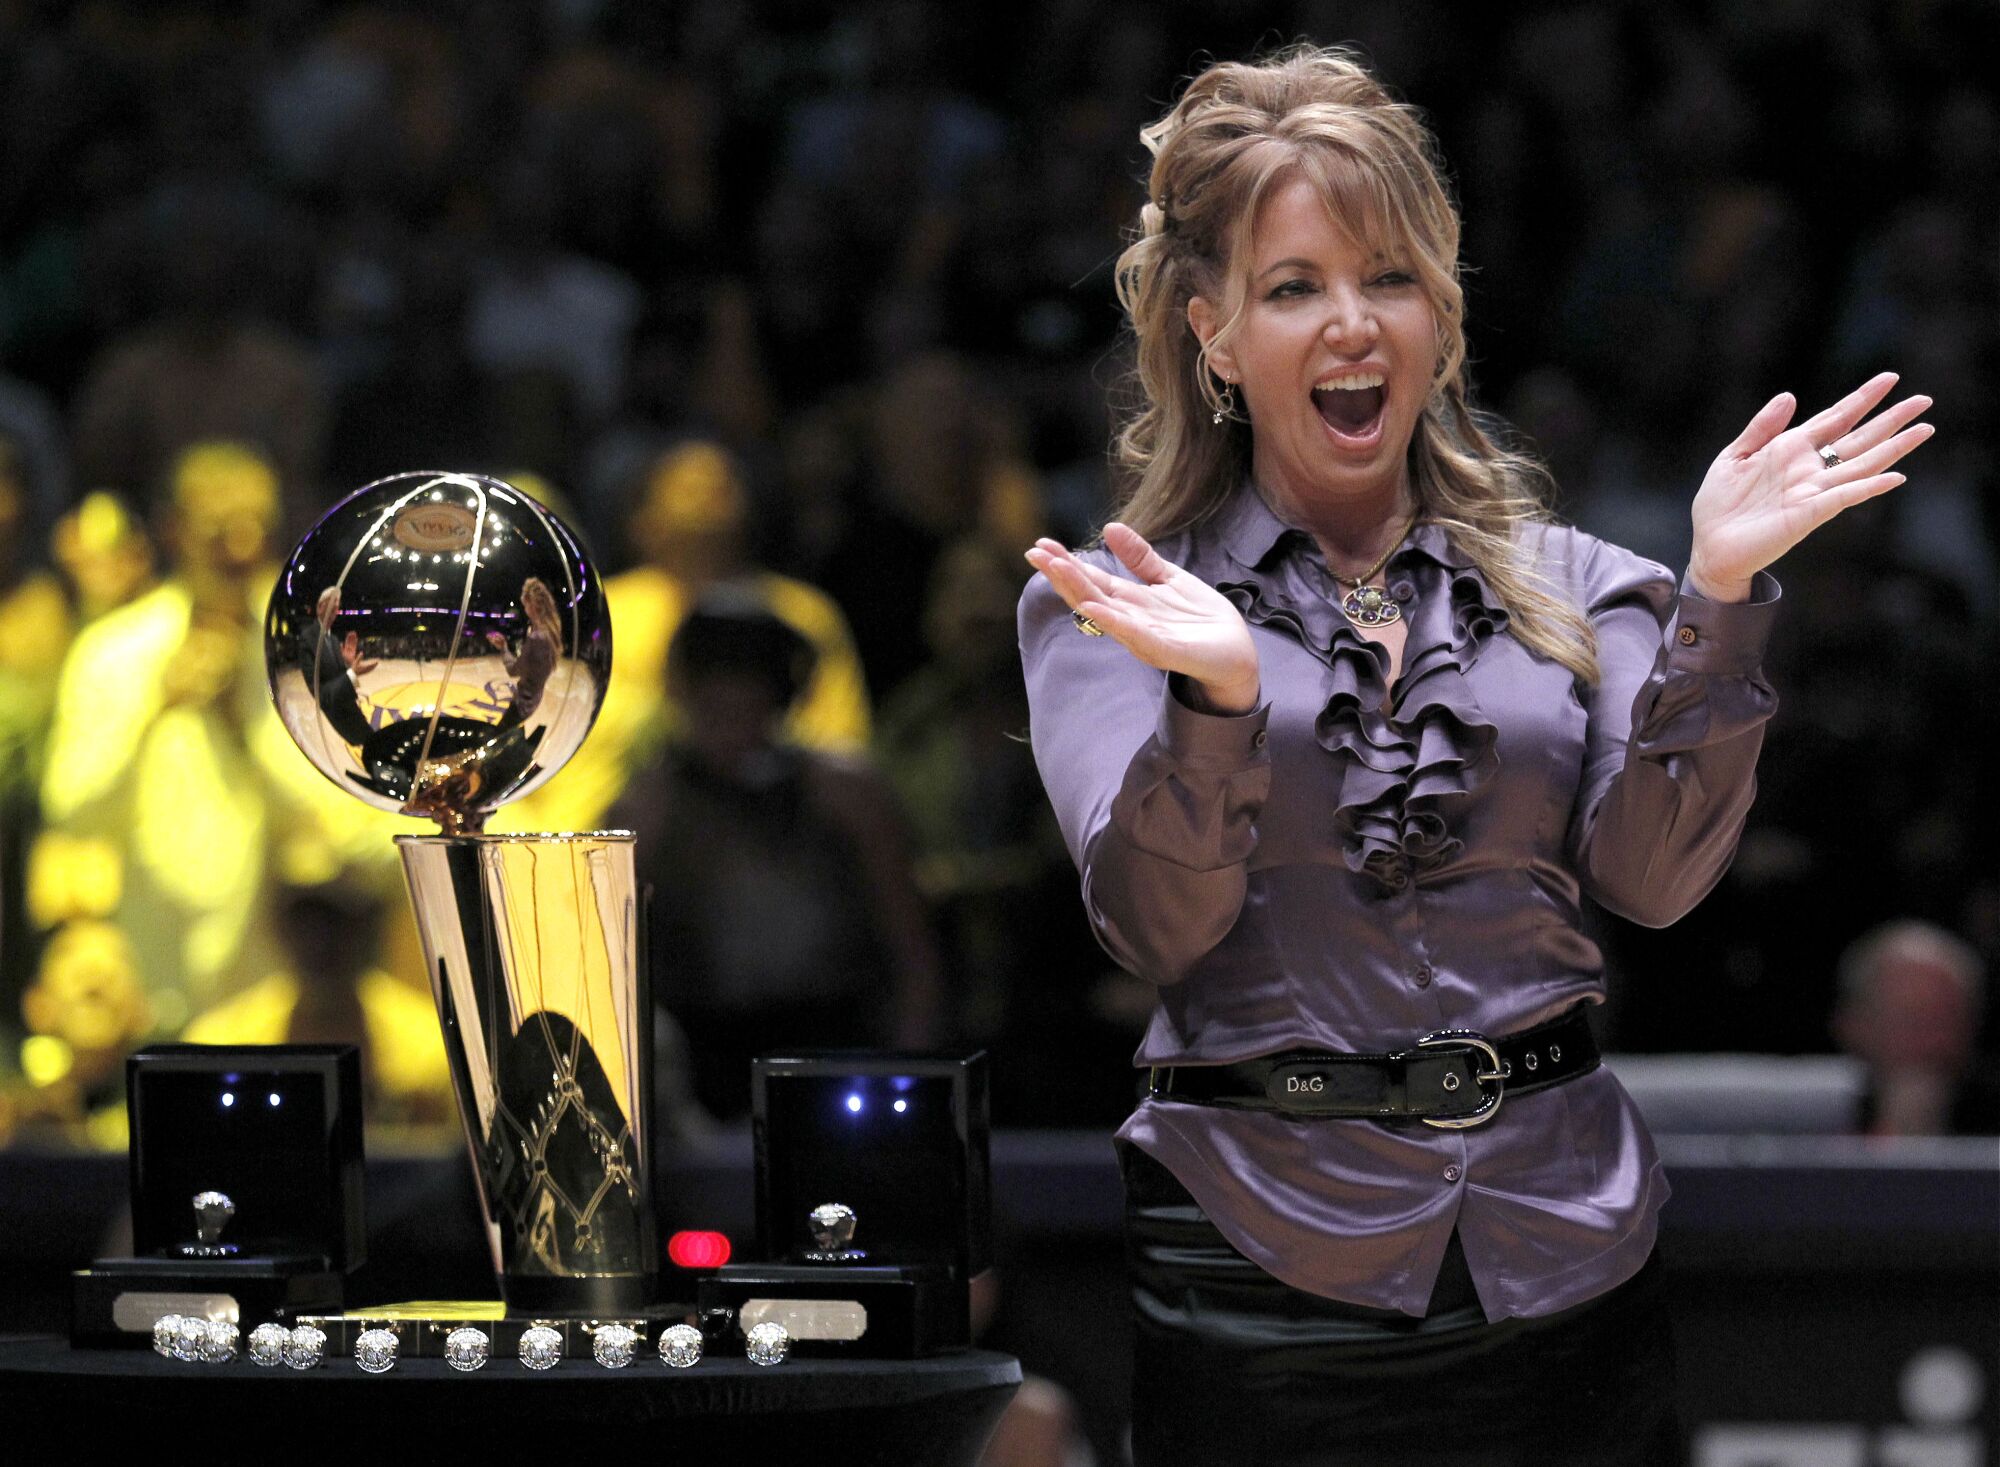 A woman stands applauding next to the NBA Championship trophy